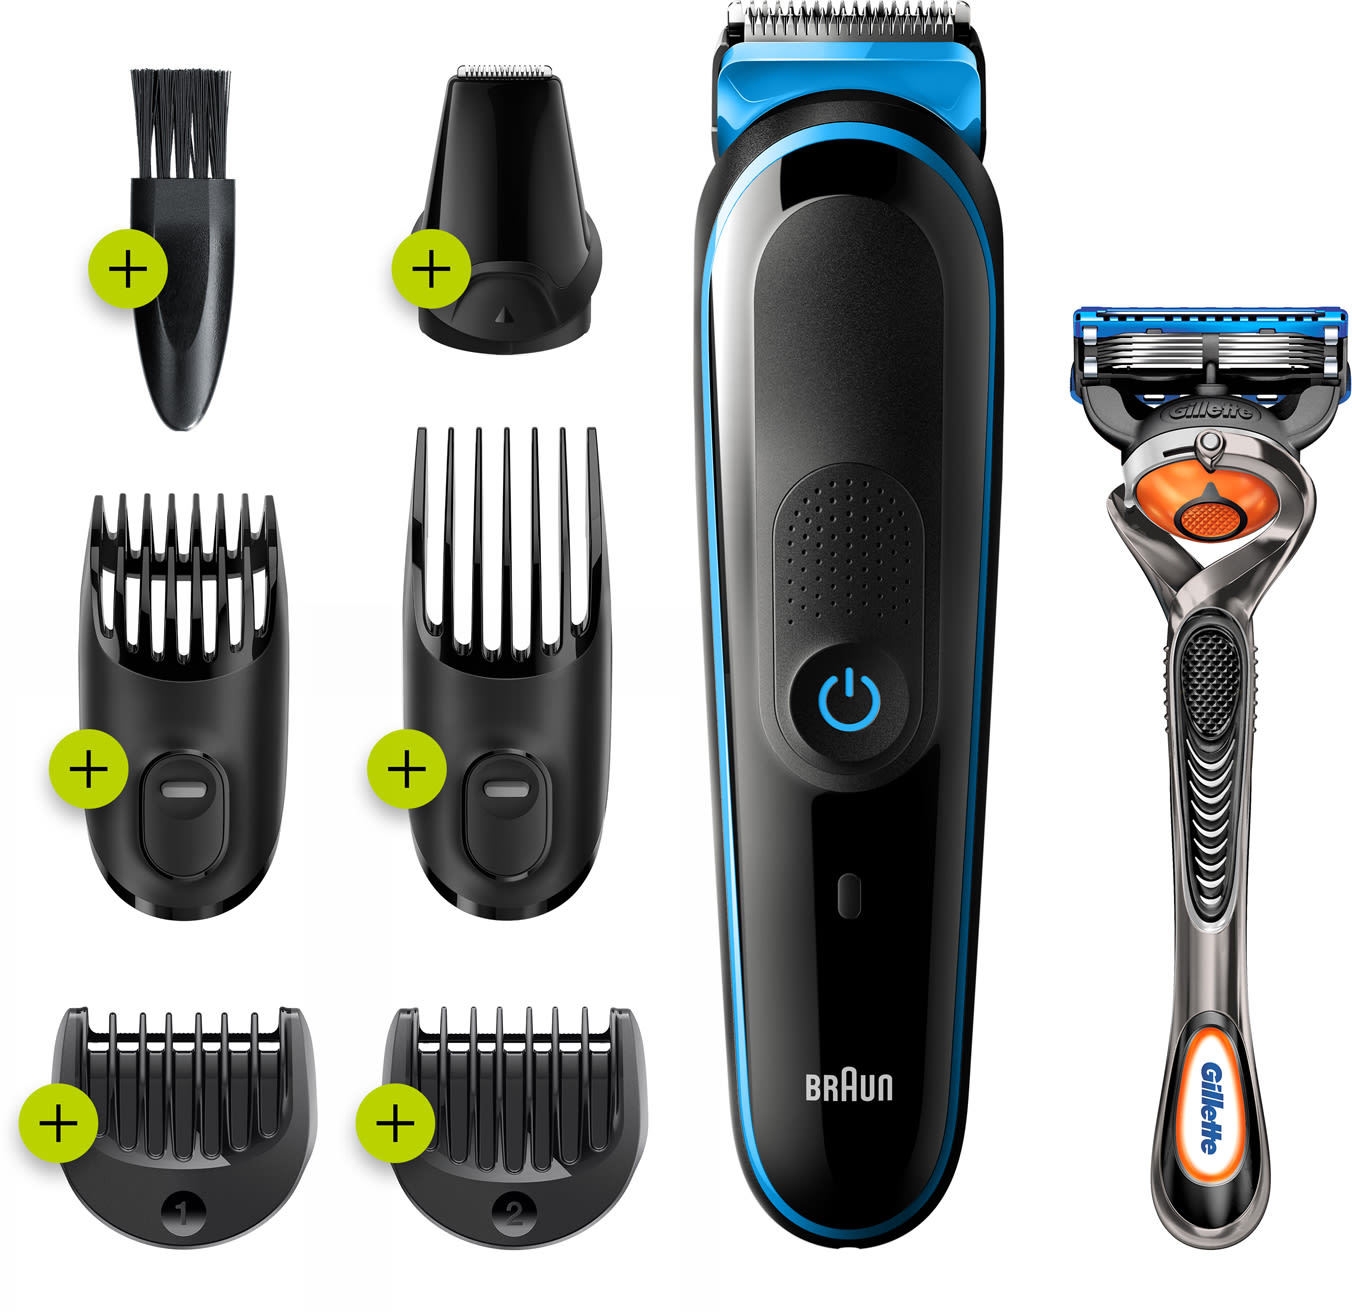 hair trimmer recommendations